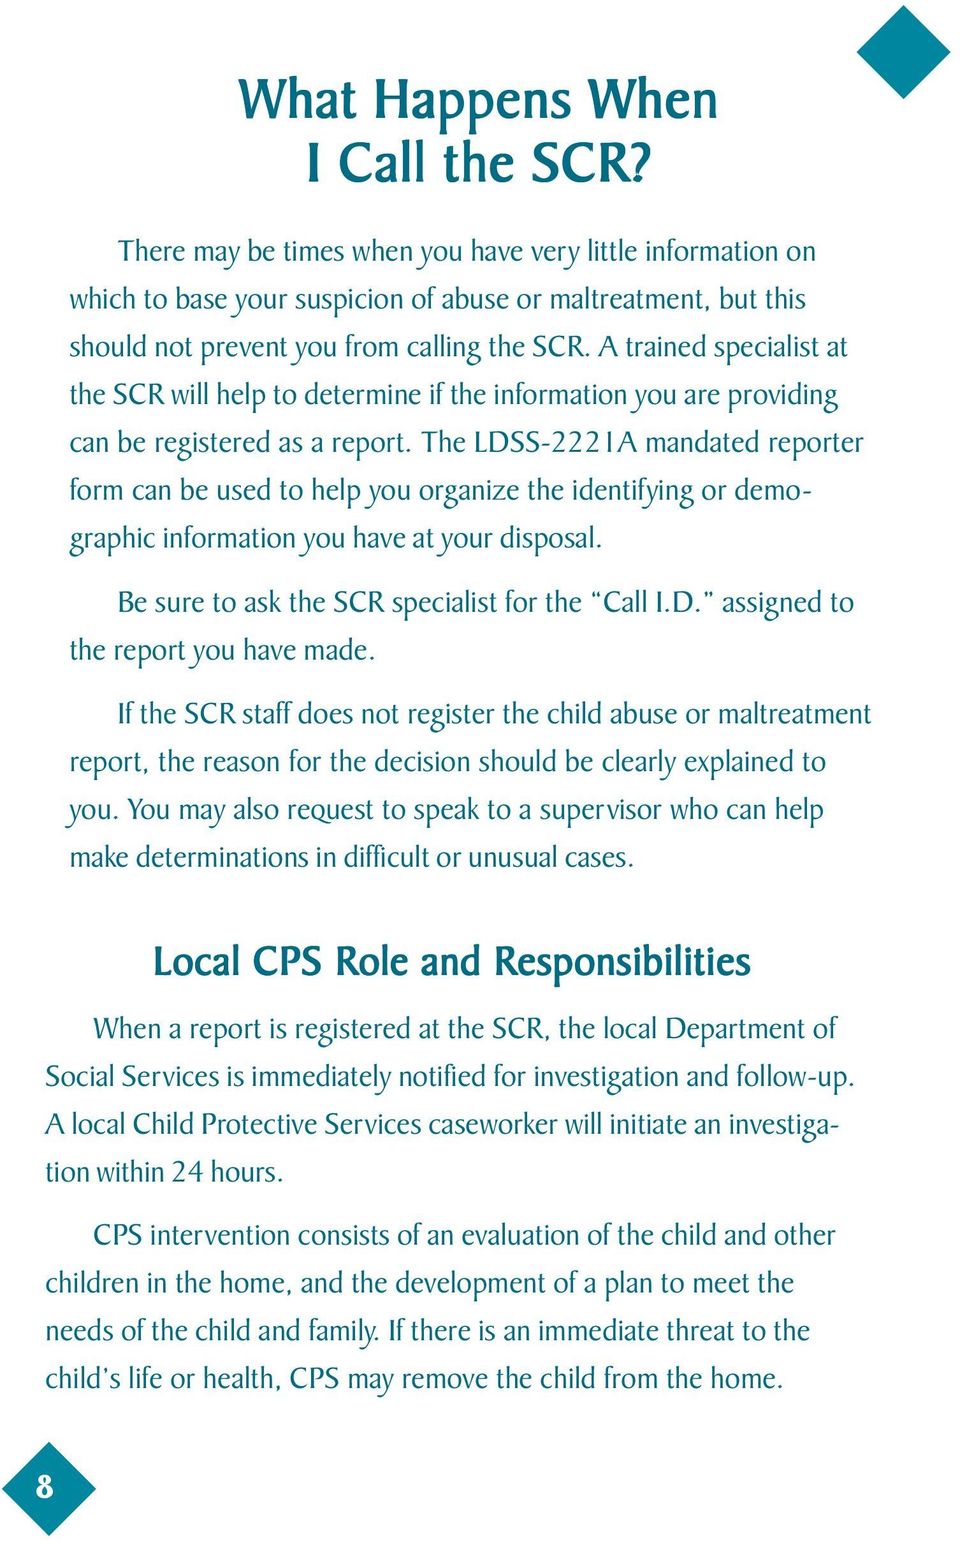 A trained specialist at the SCR will help to determine if the information you are providing can be registered as a report.